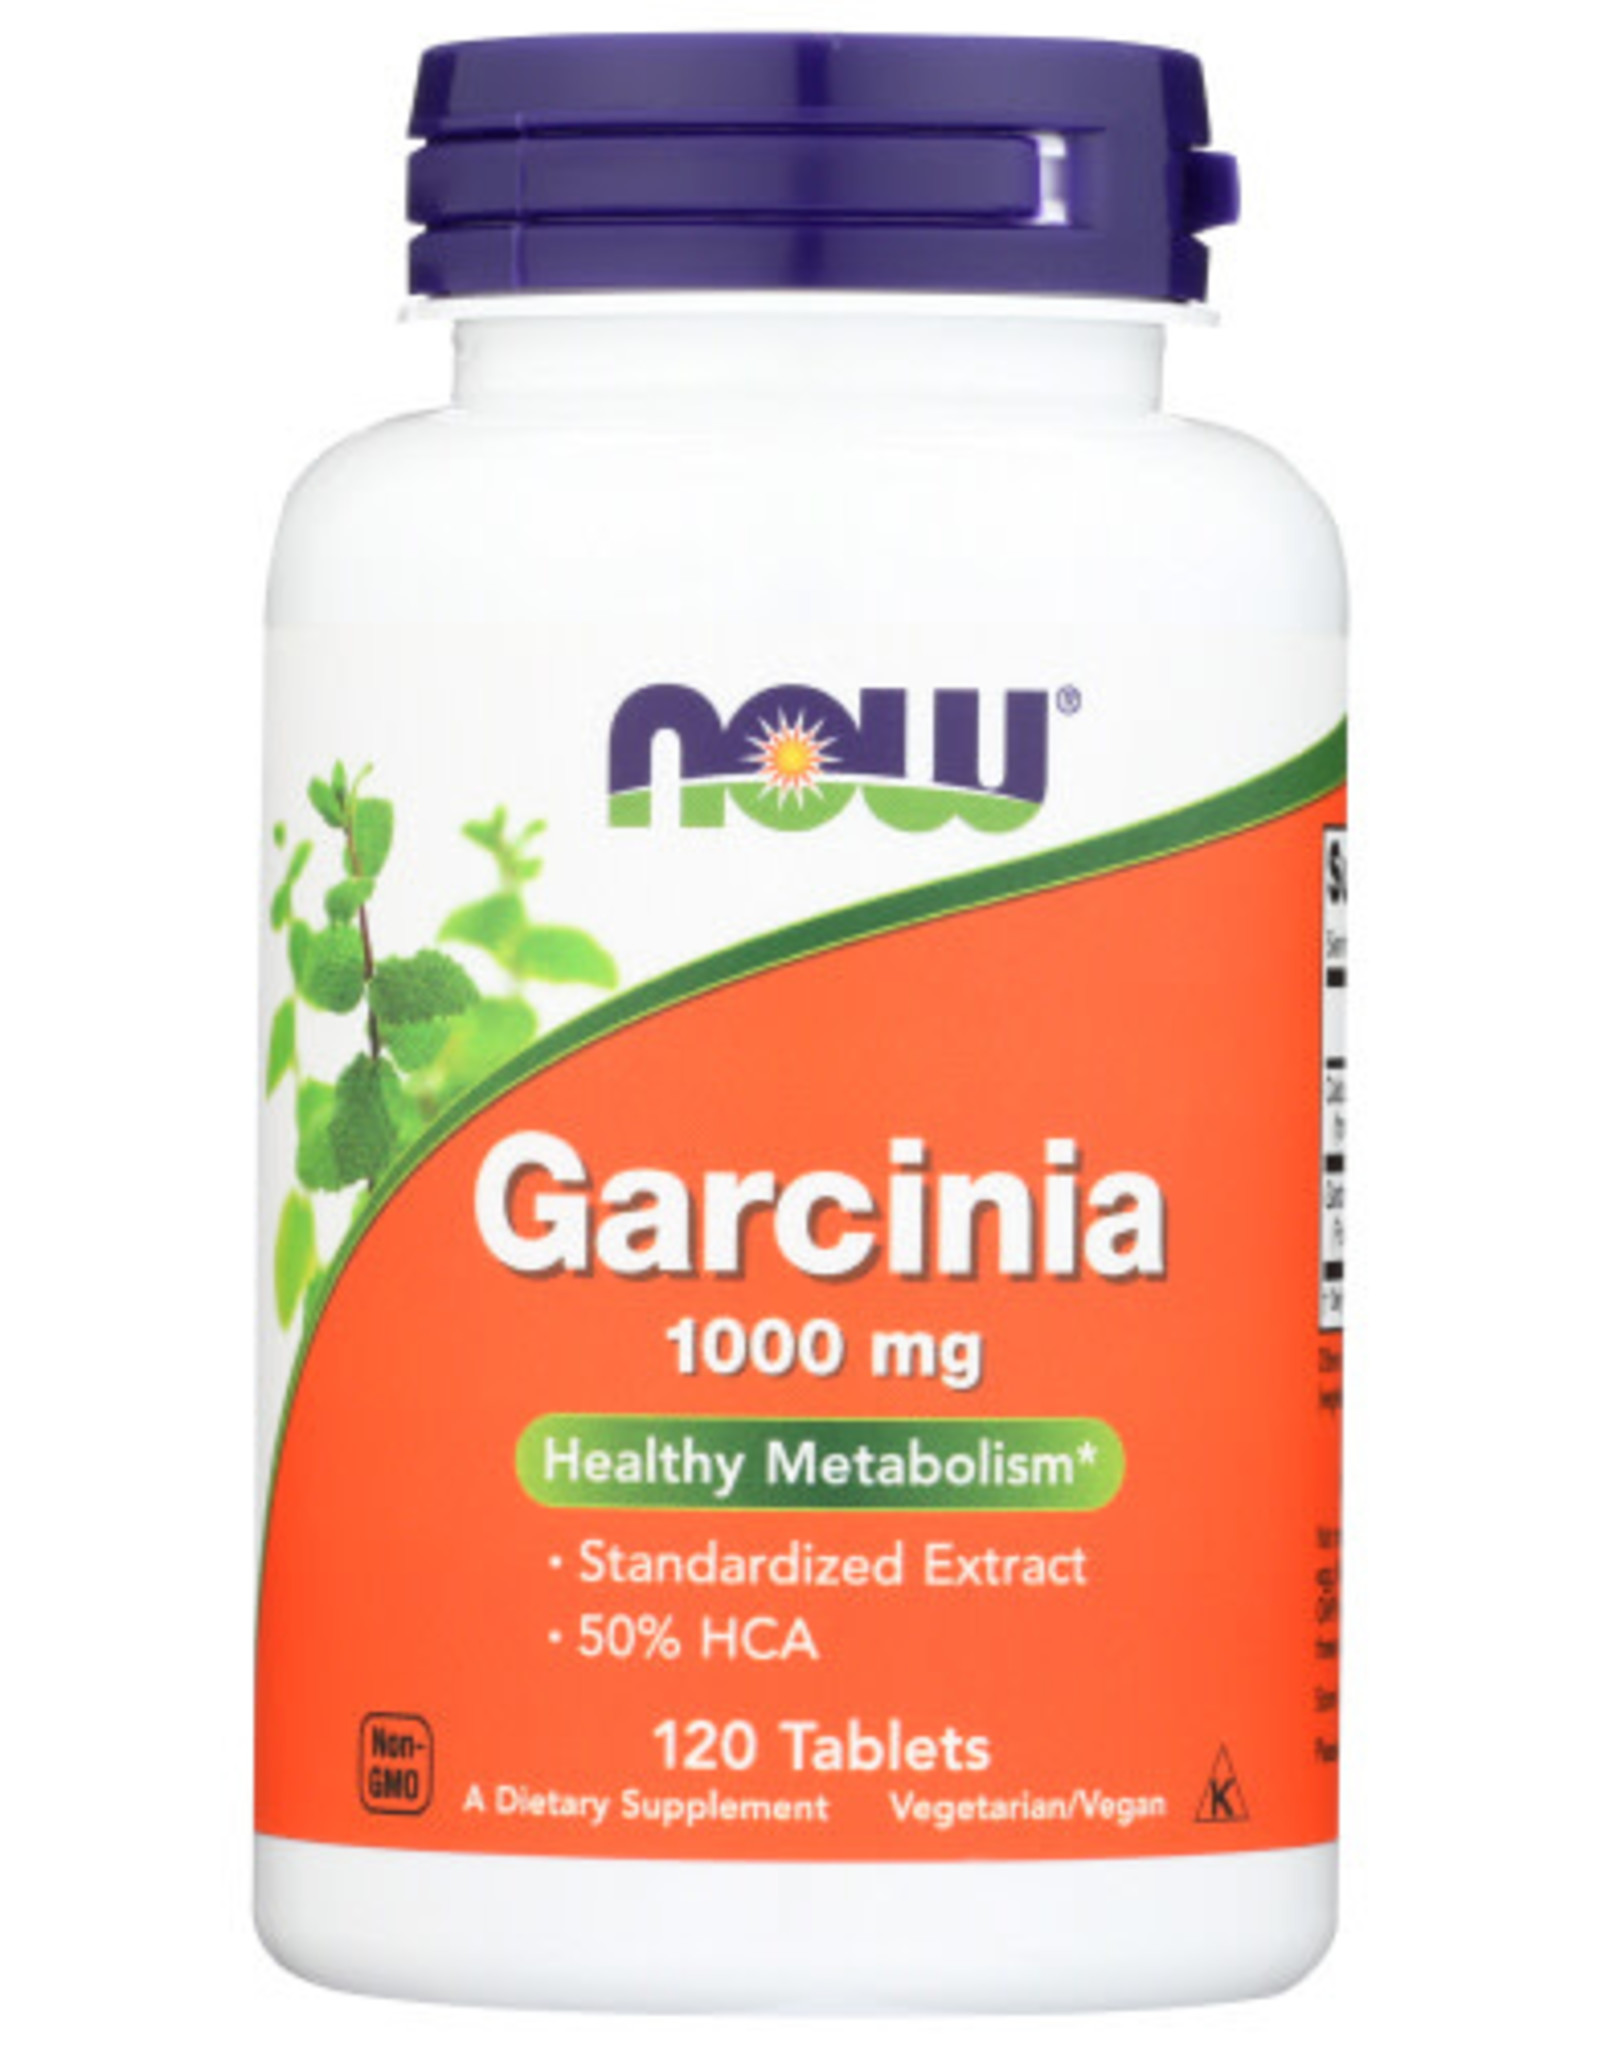 NOW® NOW GARCINIA DIETARY SUPPLEMENT, 120 TABLETS